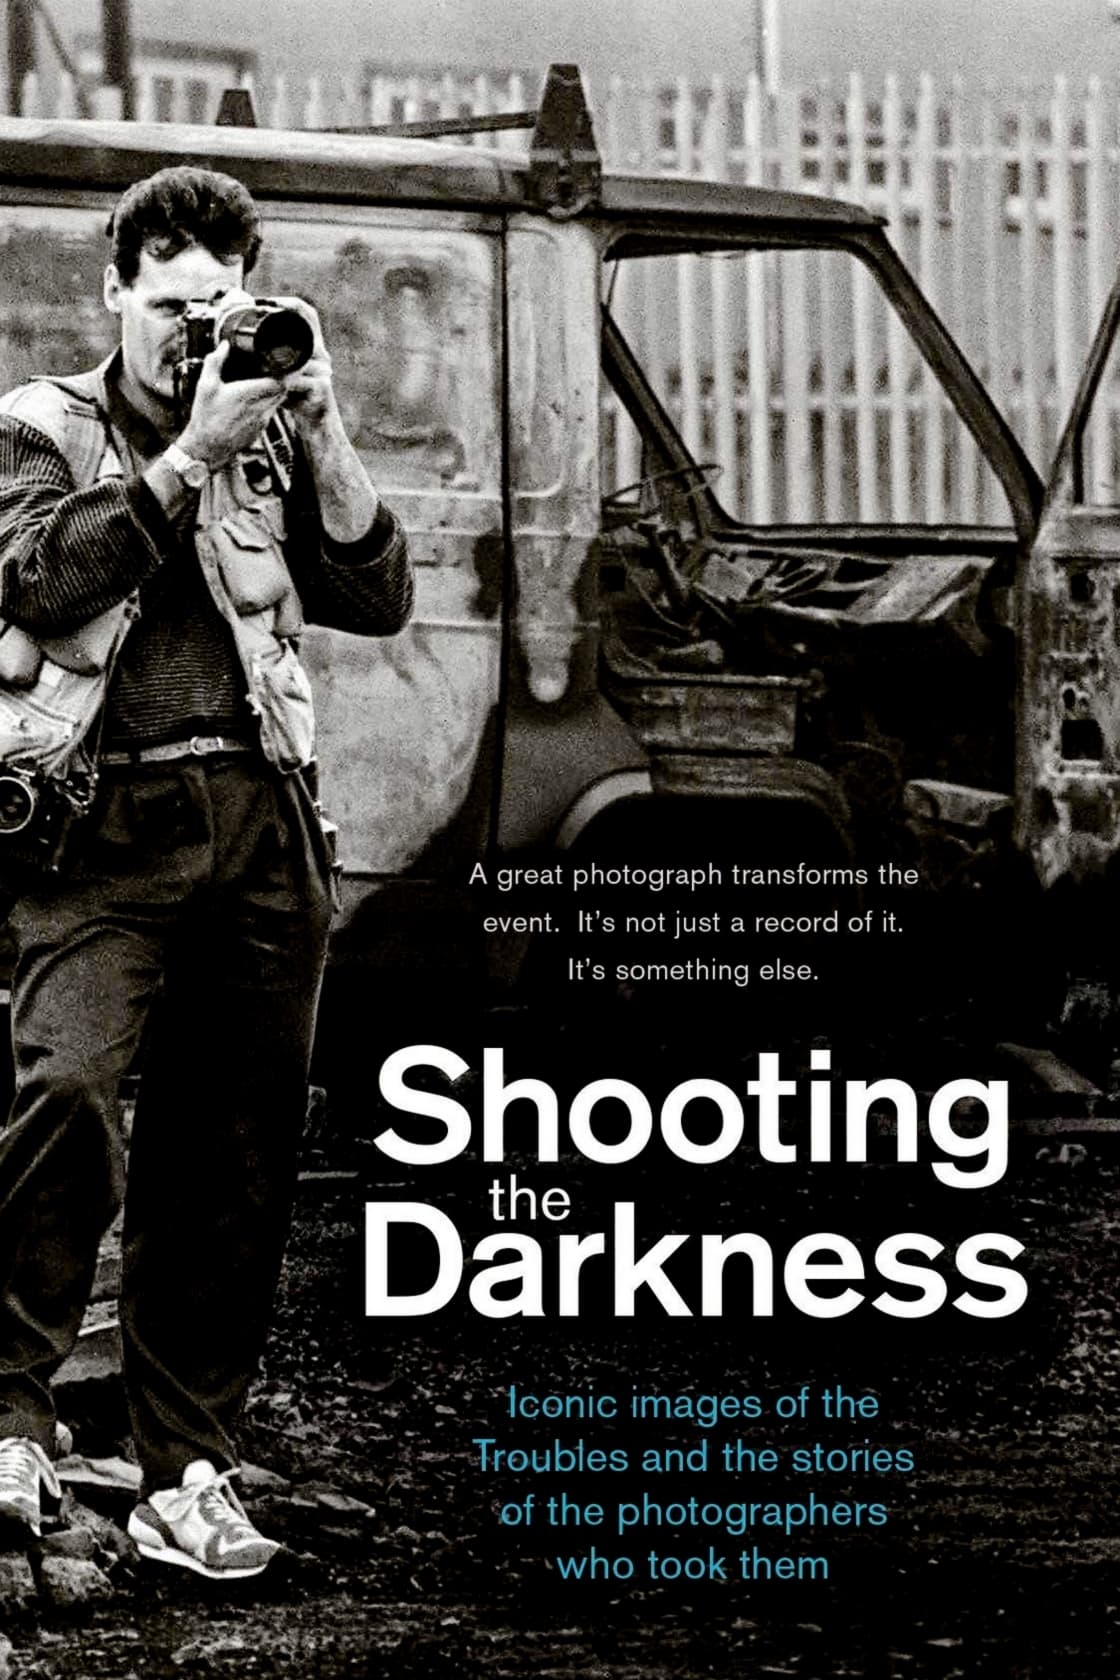 Shooting the Darkness